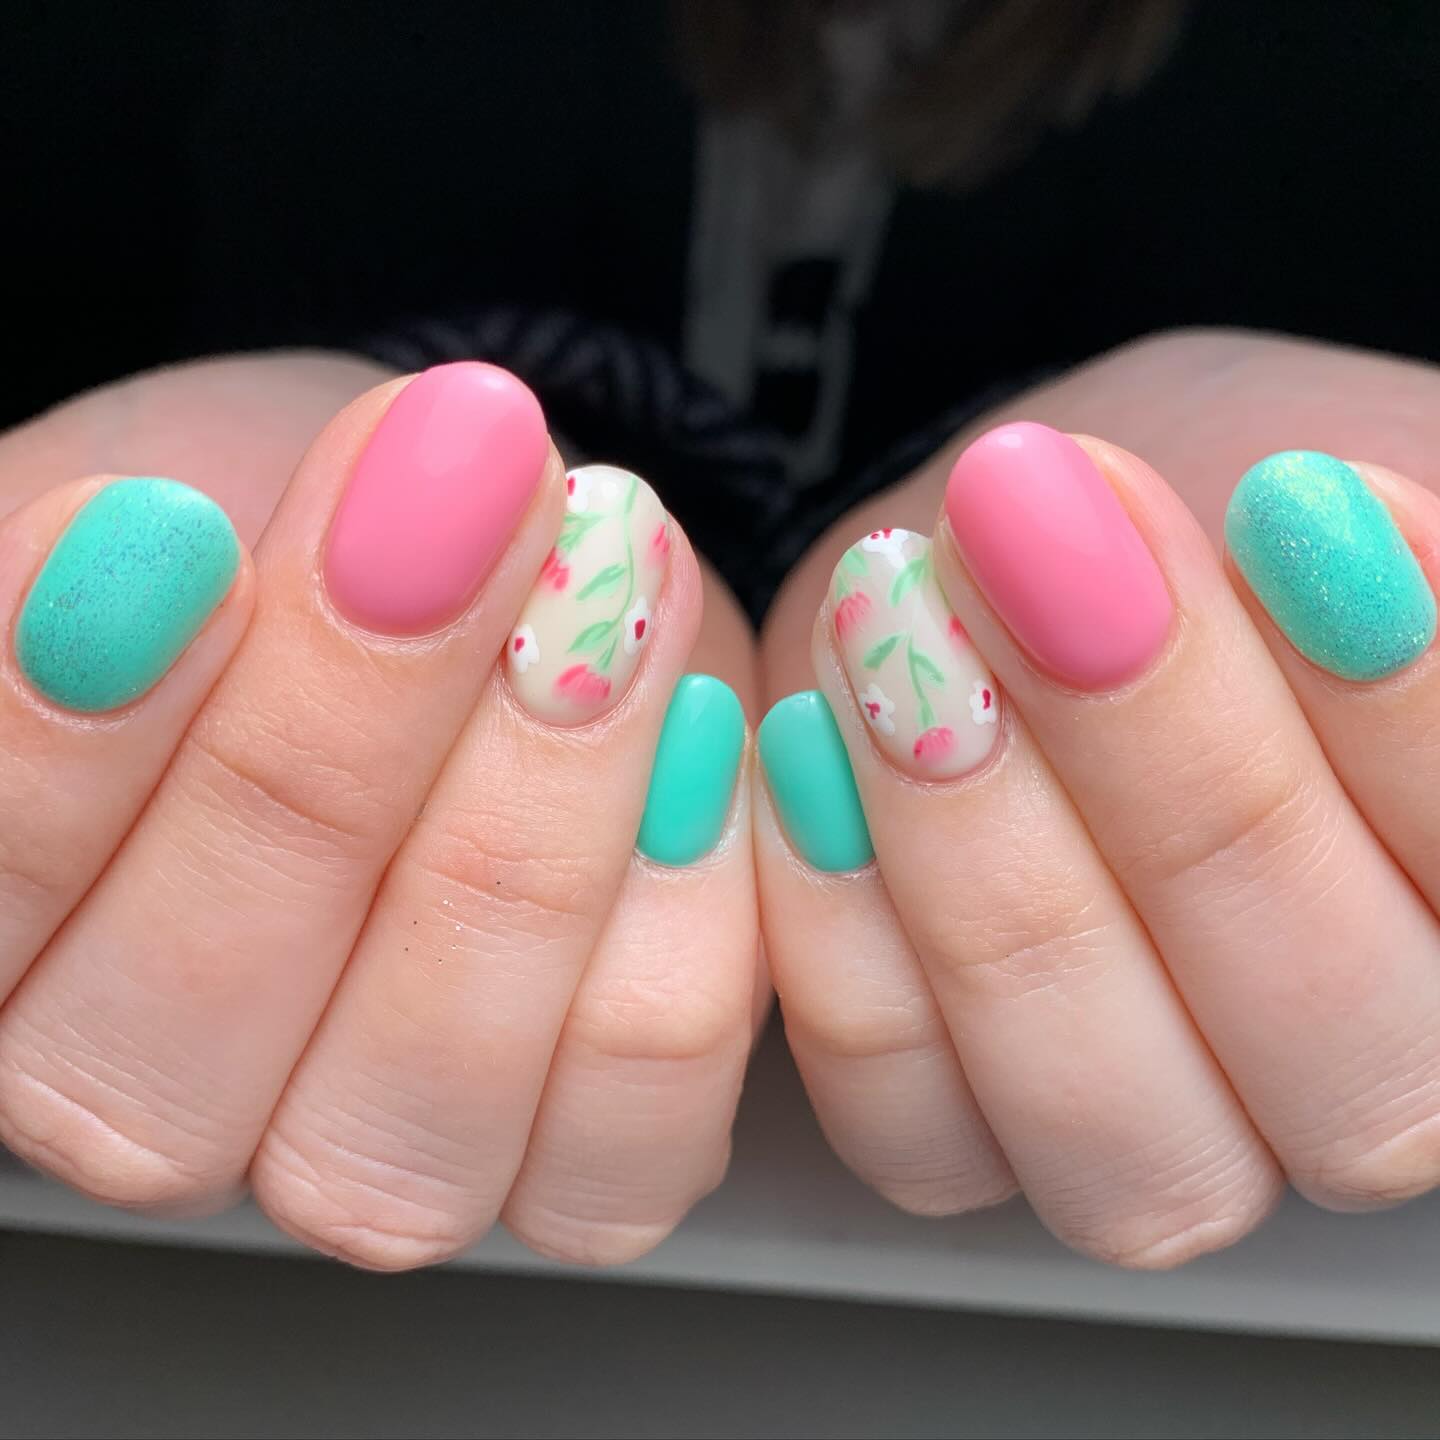 100 Pretty Spring Nail Designs To Try This Year images 9